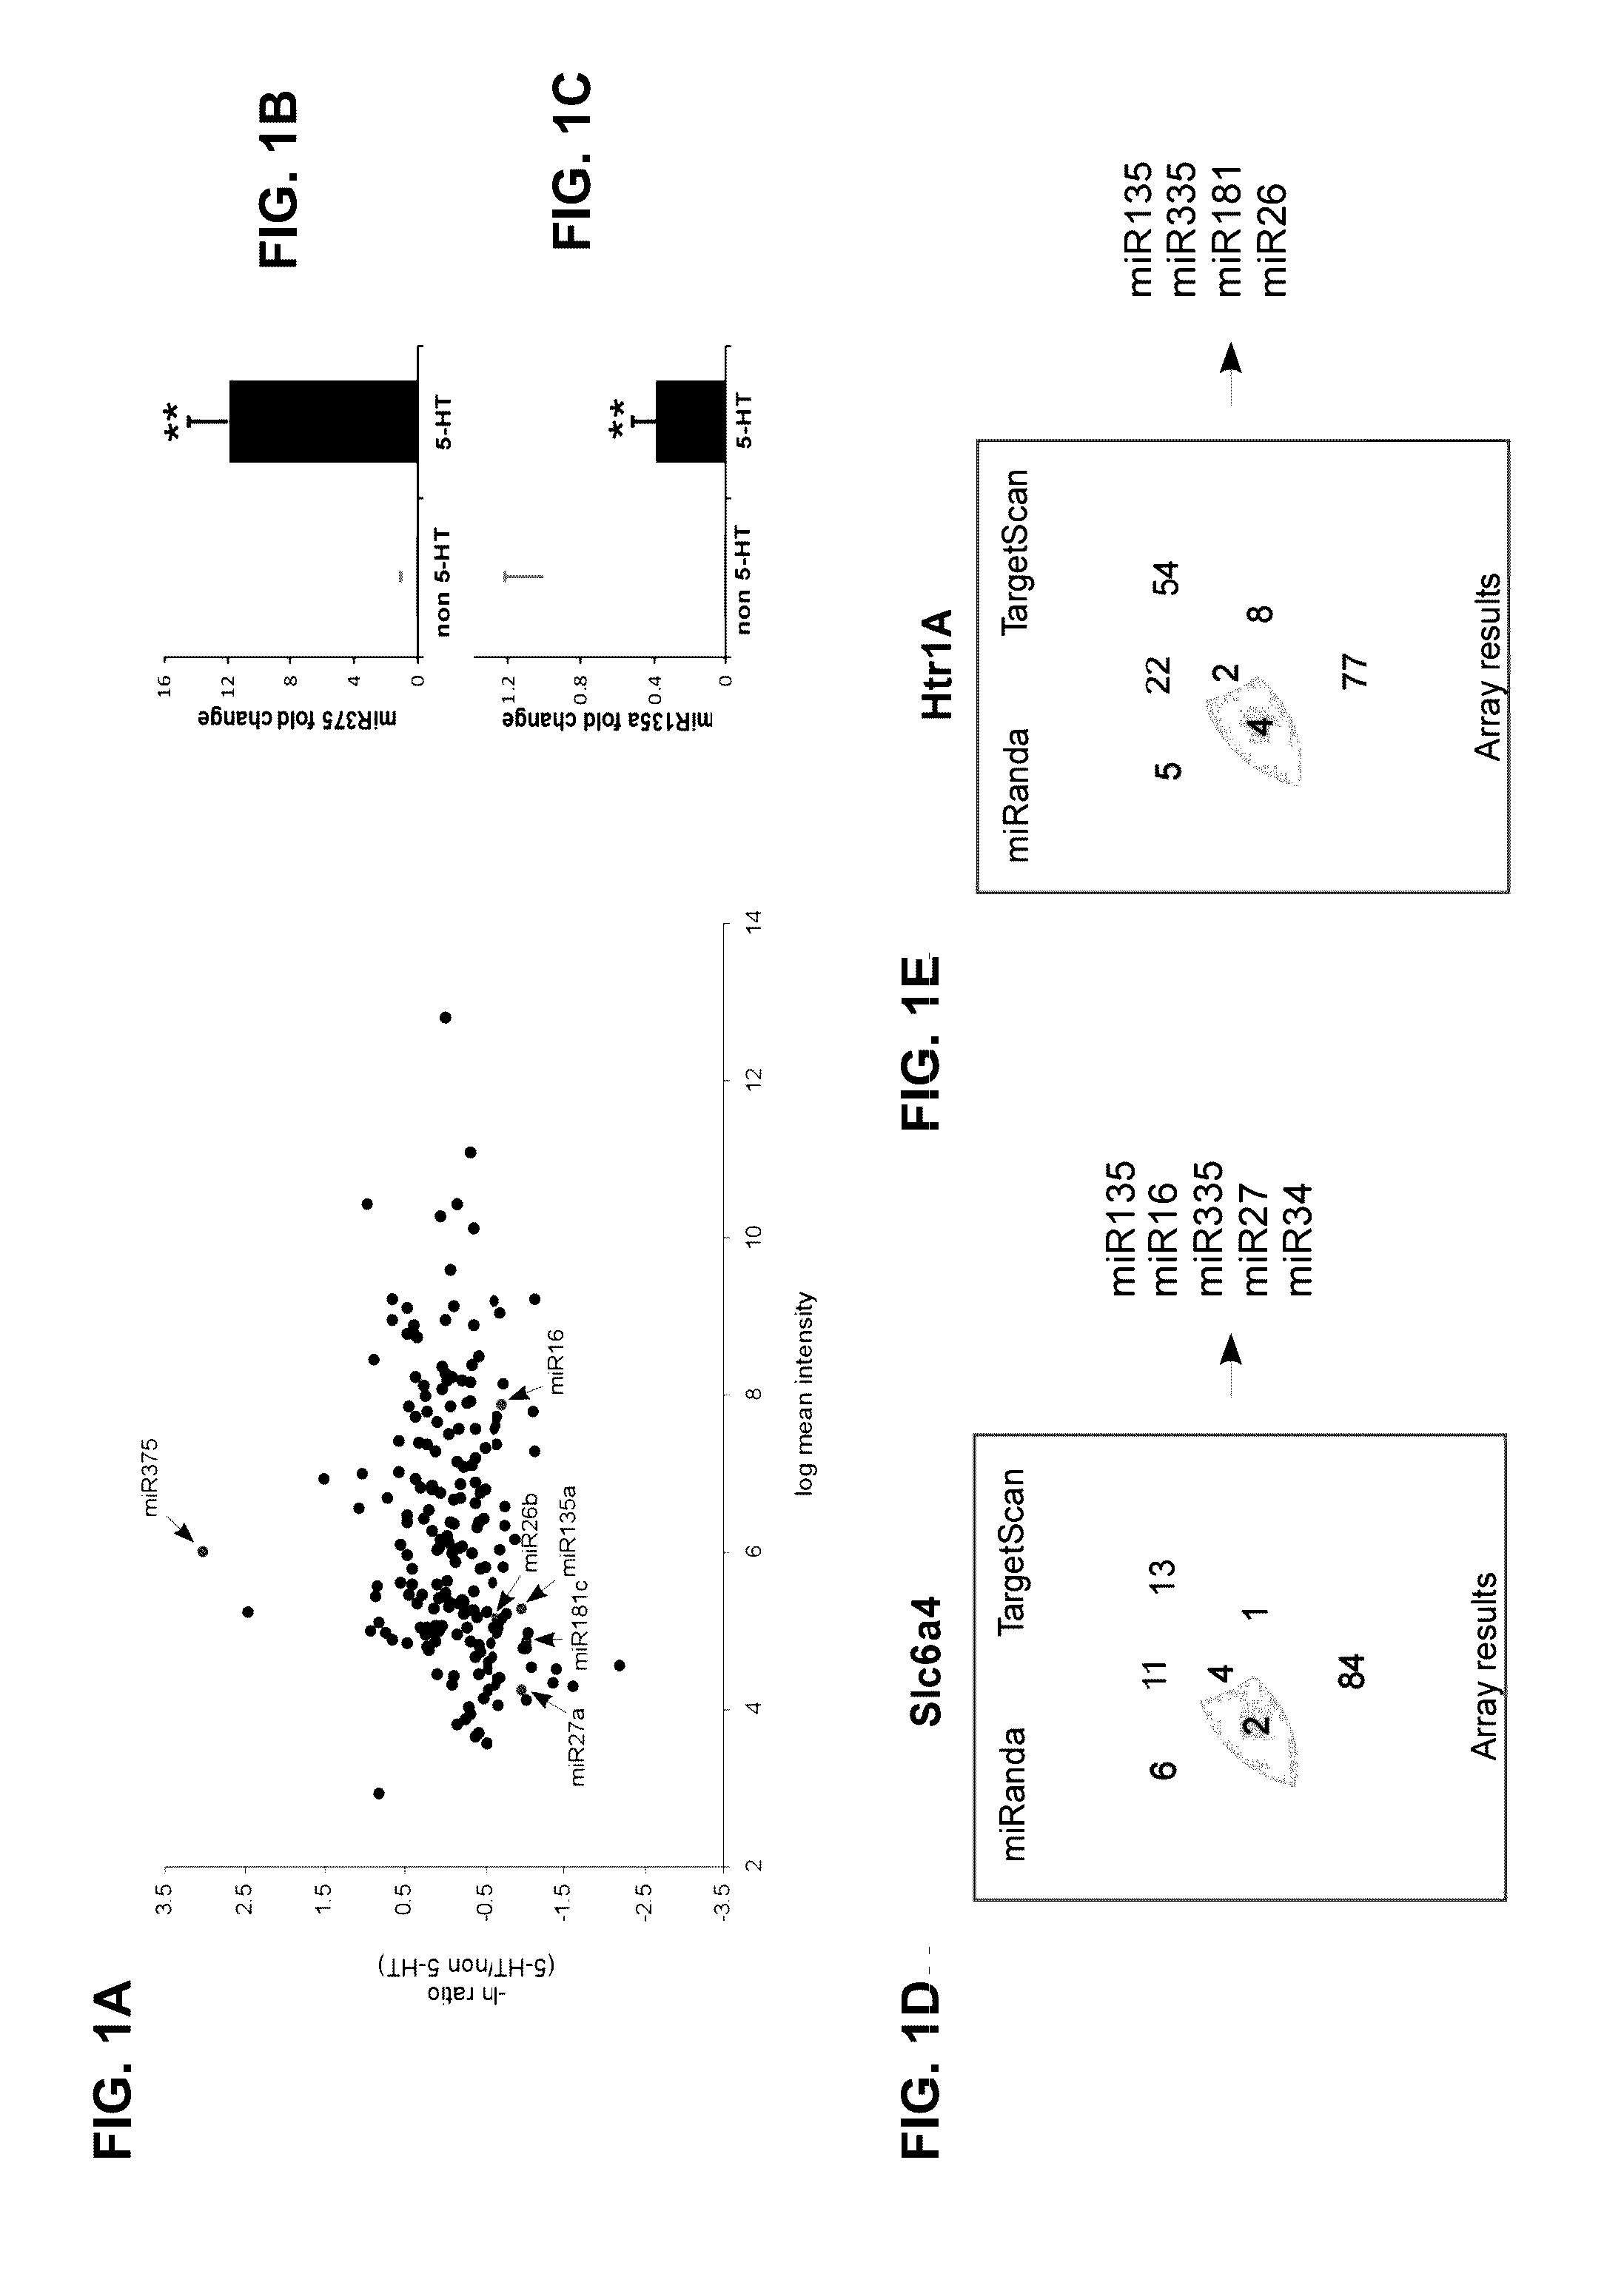 Micro-rnas and compositions comprising same for the treatment and diagnosis of serotonin-, adrenalin-, noradrenalin-, glutamate-, and corticotropin-releasing hormone- associated medical conditionsnoradreanlin-, glutamate-, and corticotropin releasing hormone- associated medical conditions